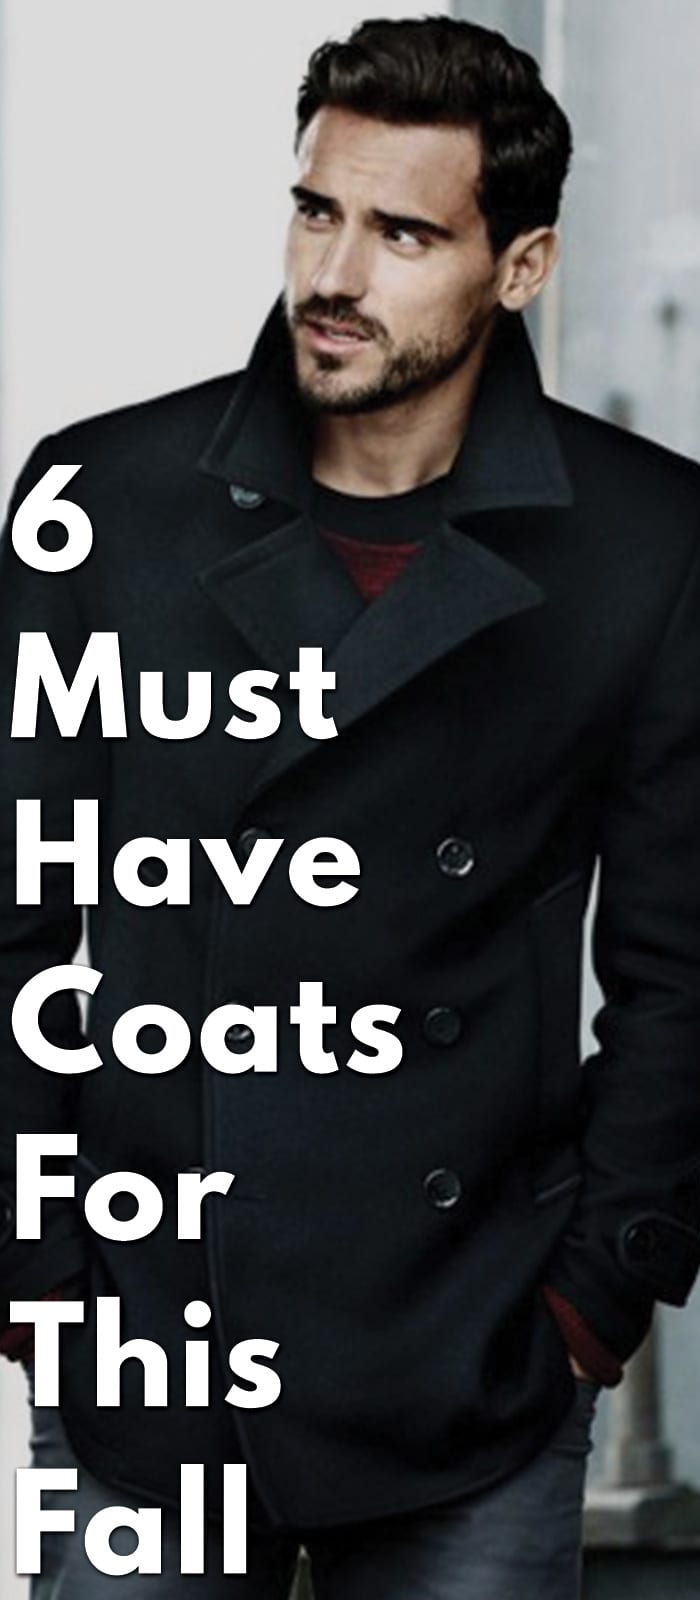 6-Must-Have-Coats-For-This-Fall